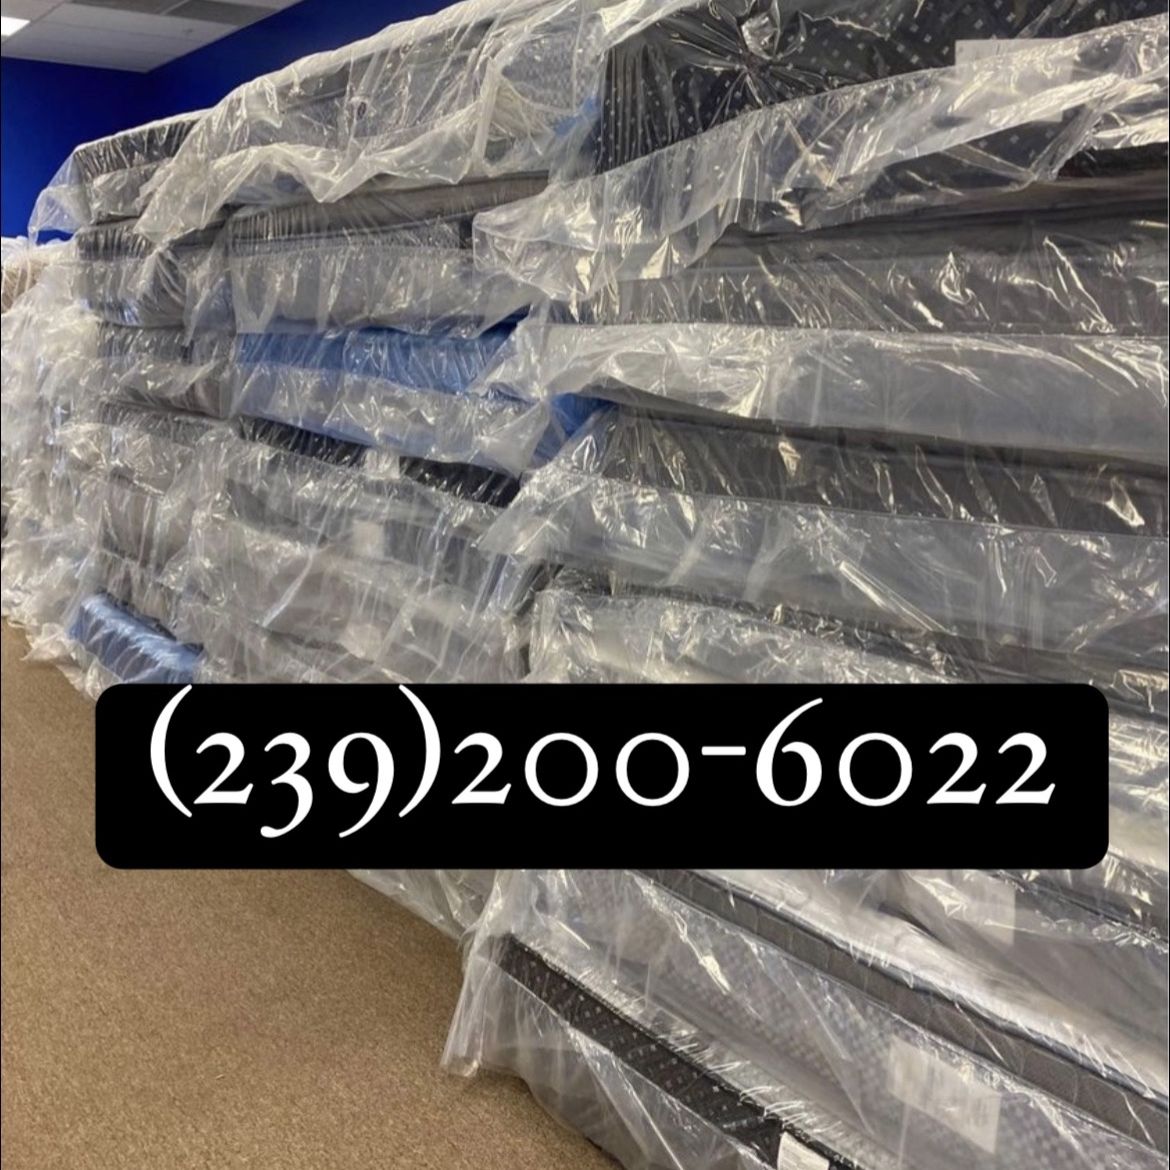 Never Used!! Brand Name Mattress / Sets Factory Direct 50-80% Off Big Retail- MUST SELL INVENTORY 